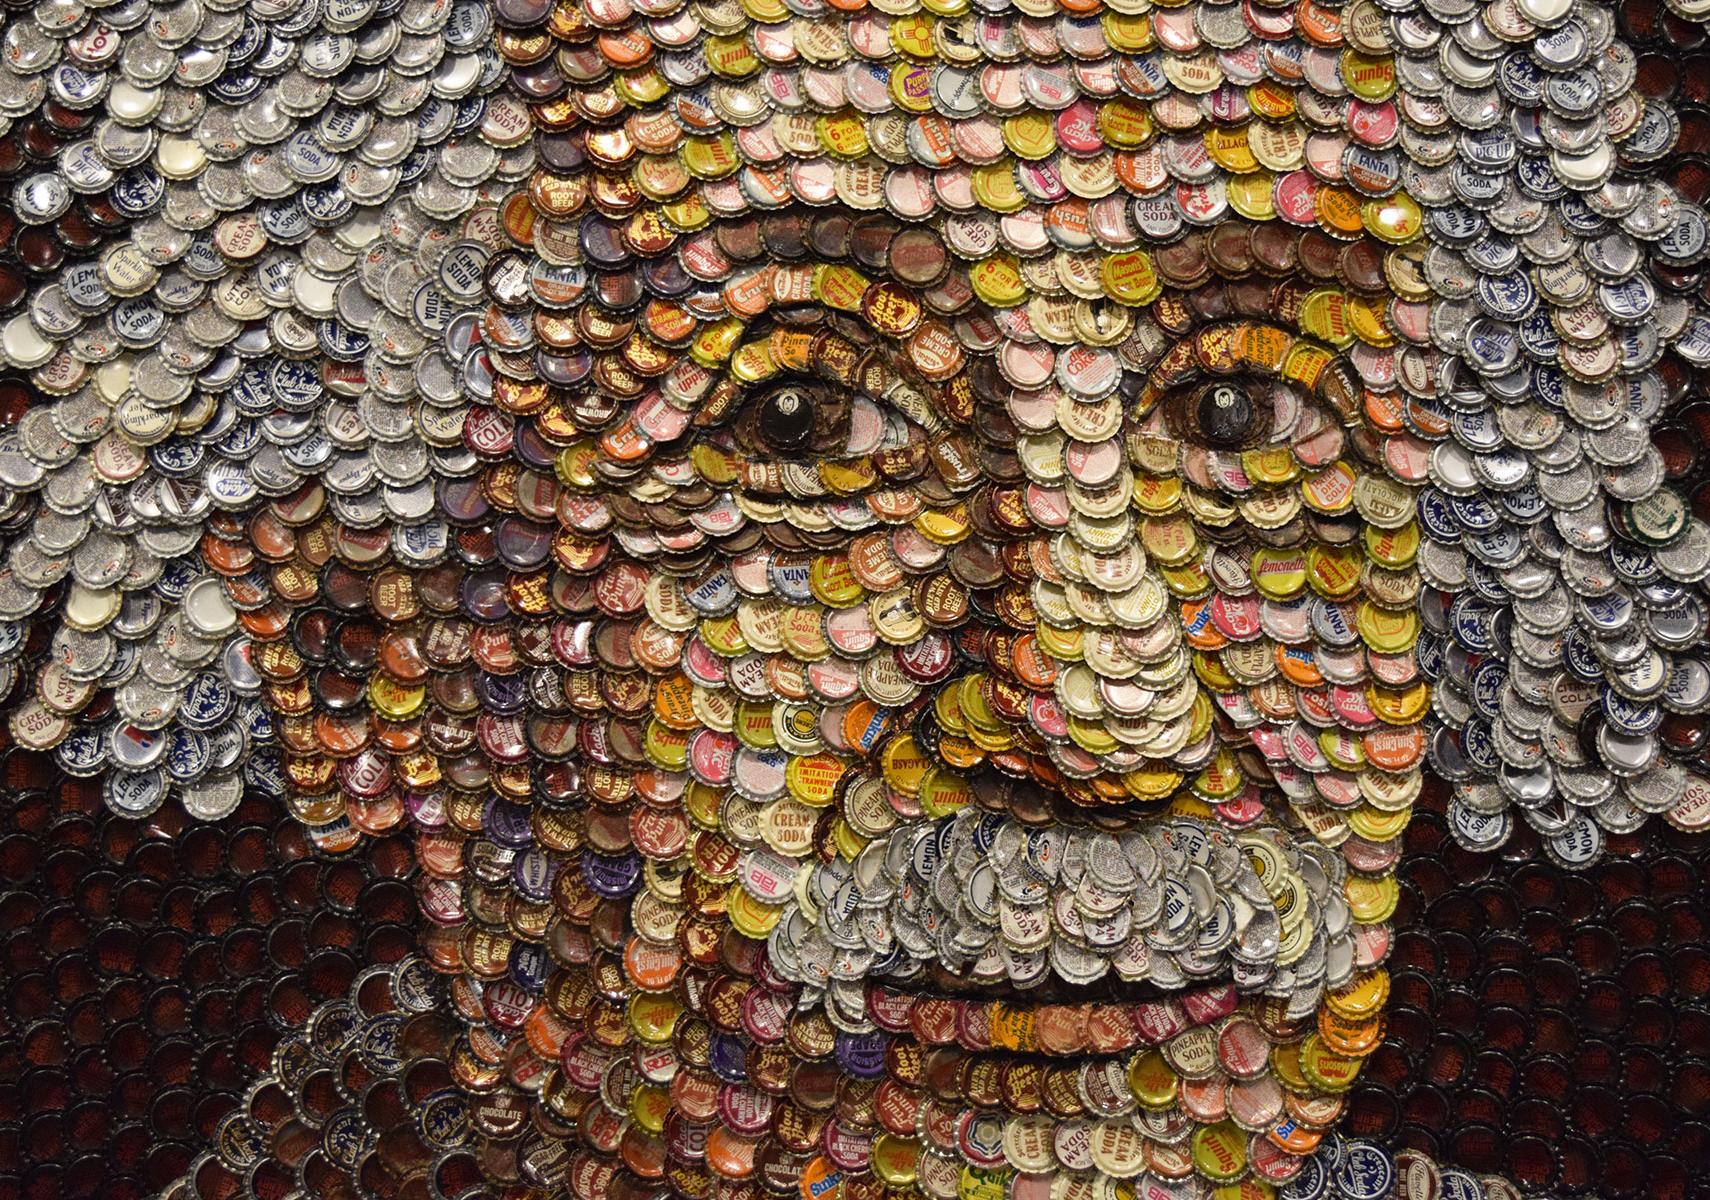 Mosaic portrait of Albert Einstein made of bottle caps by South Carolina artist Molly Sims